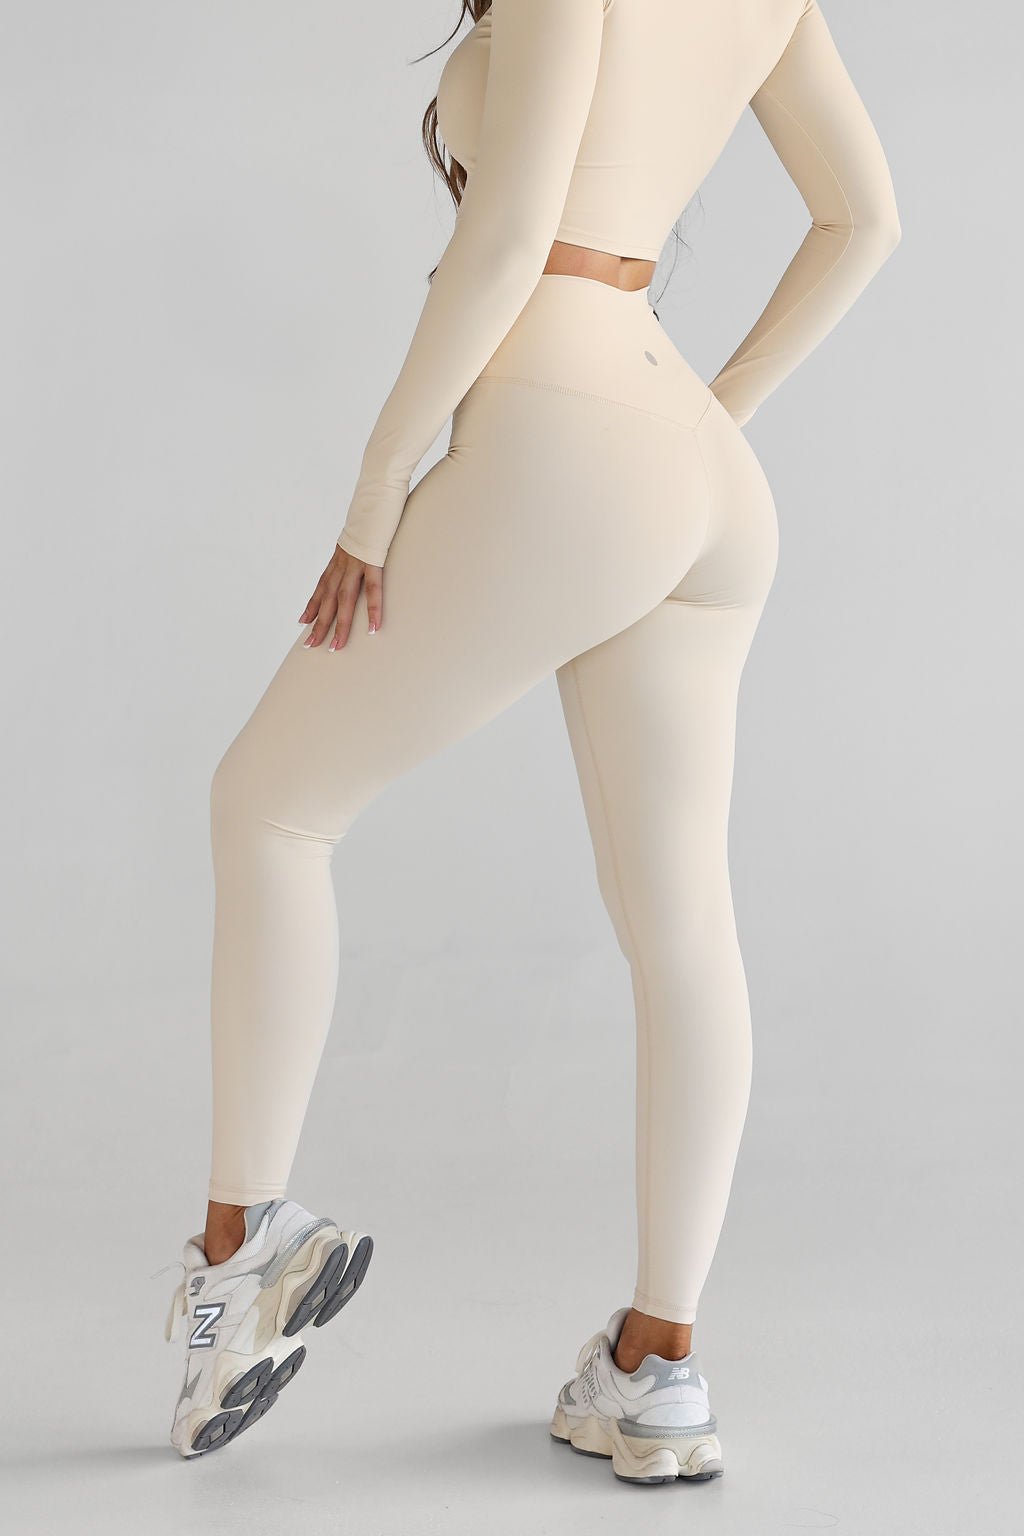 SCULPT Full Length Leggings - French Vanilla (AVAILABLE 13/08) - LEELO ACTIVE